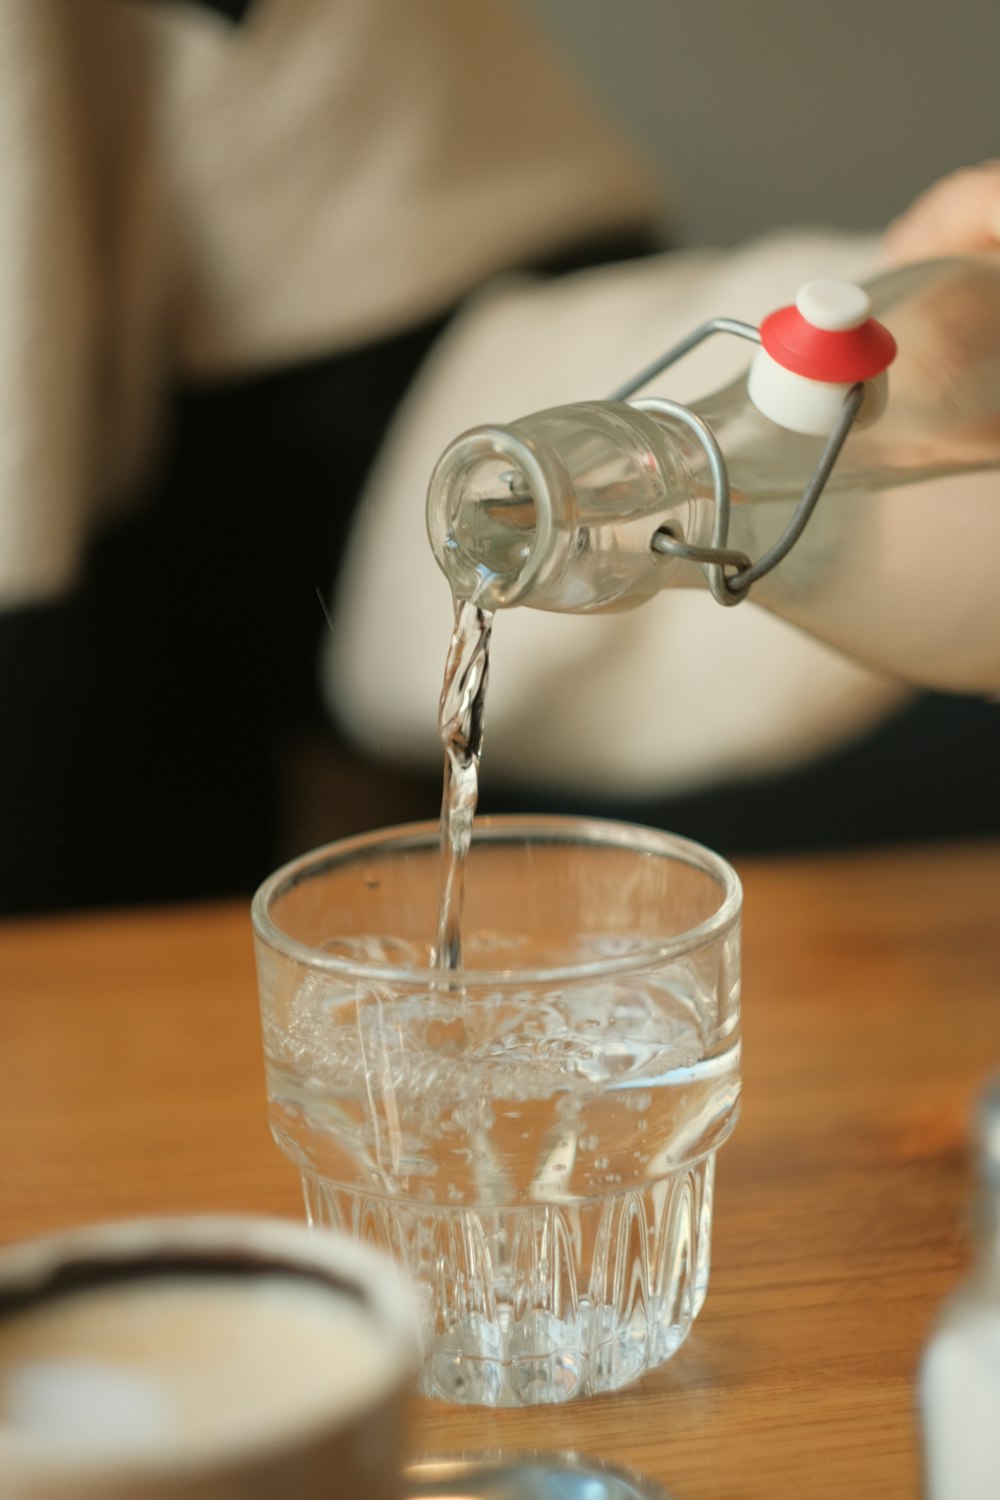 a person pouring water into a glass on a table